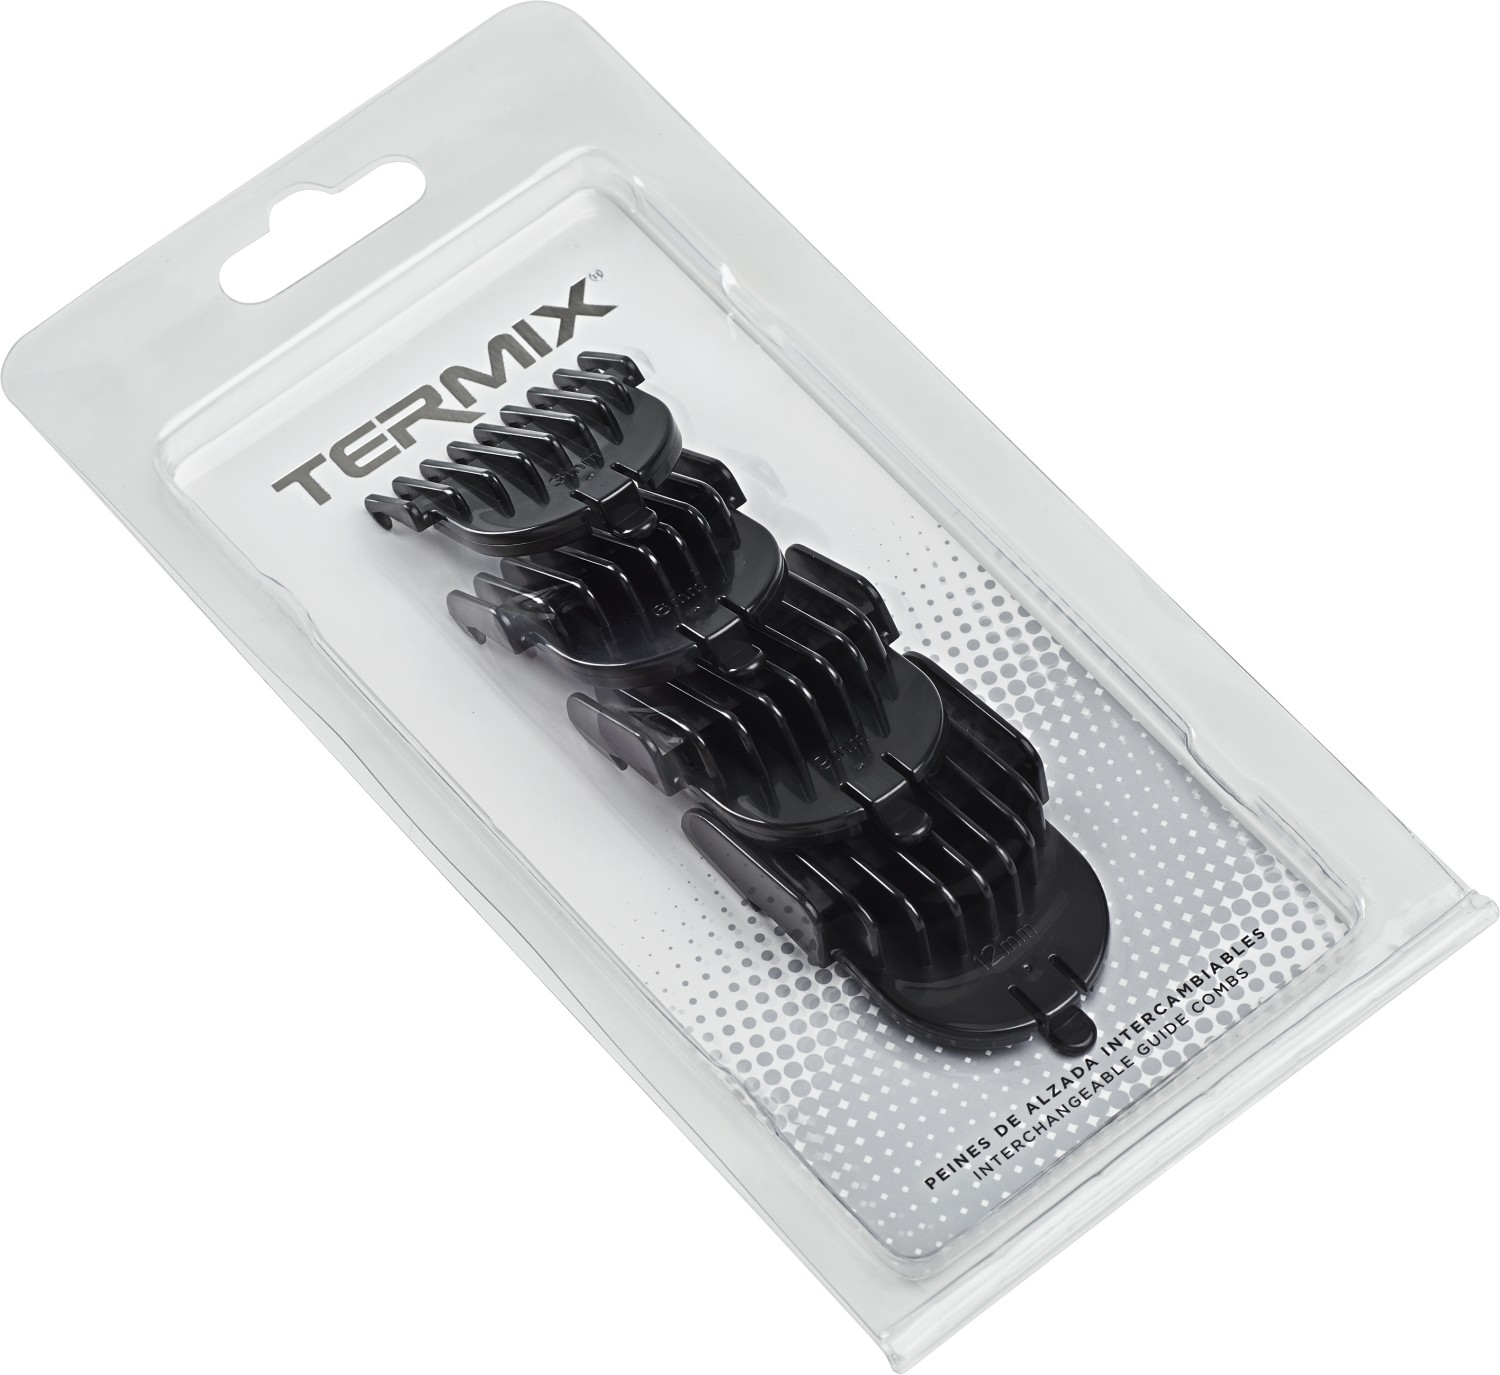  Termix Styling Cut Guide Combs Kit 